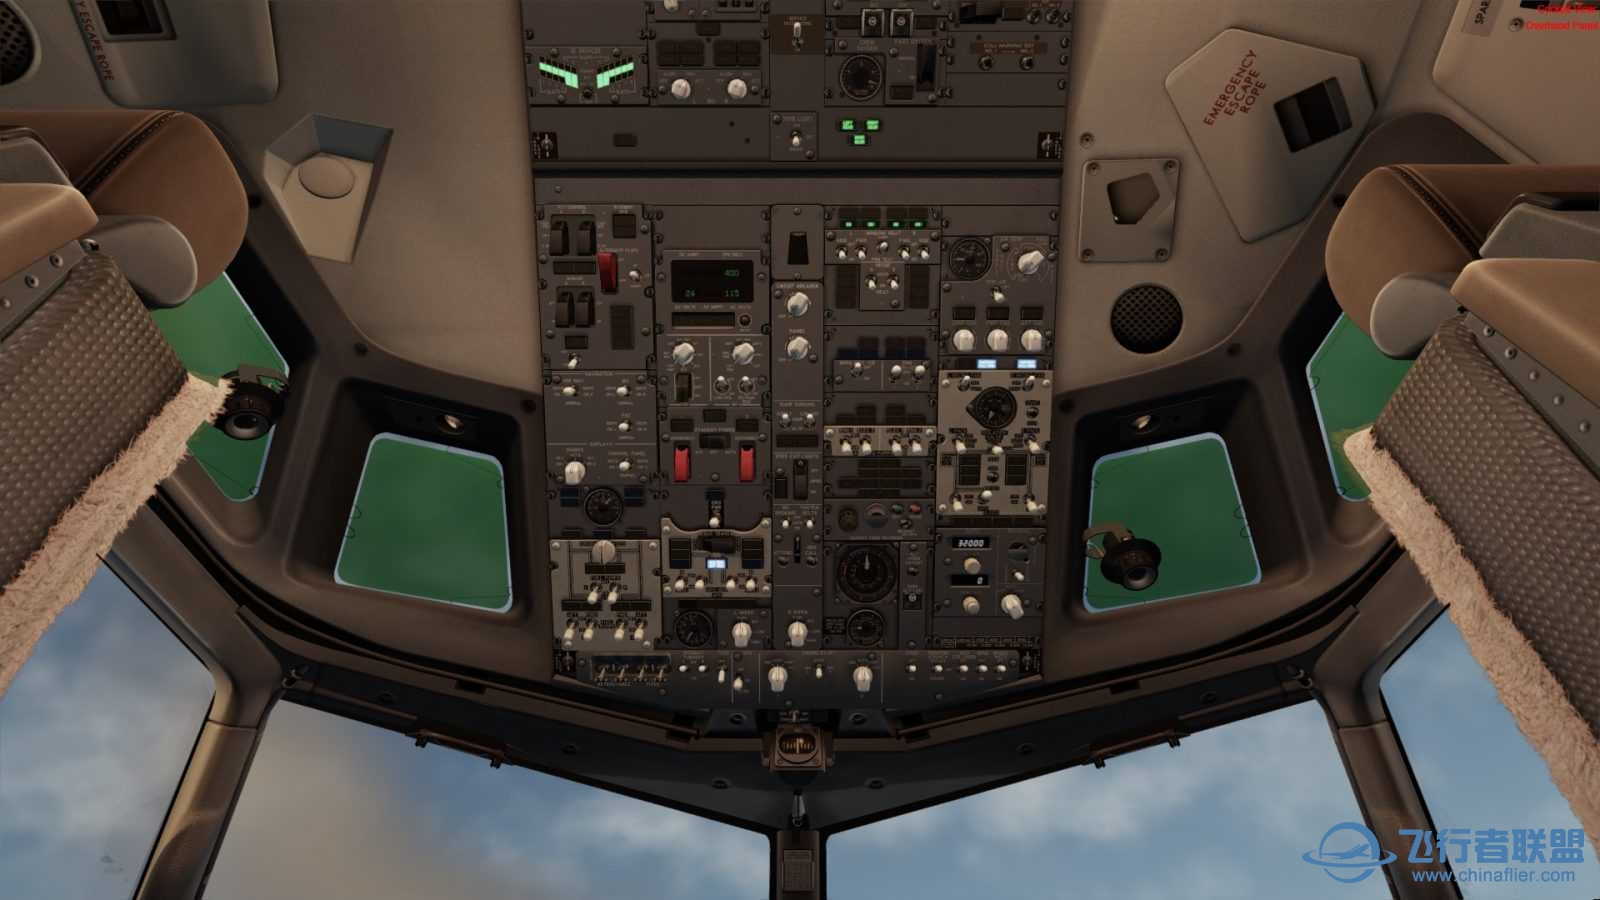 ifly-jets-advanced-series-737ng-release-candidate-p3d-05-1600x900.jpg